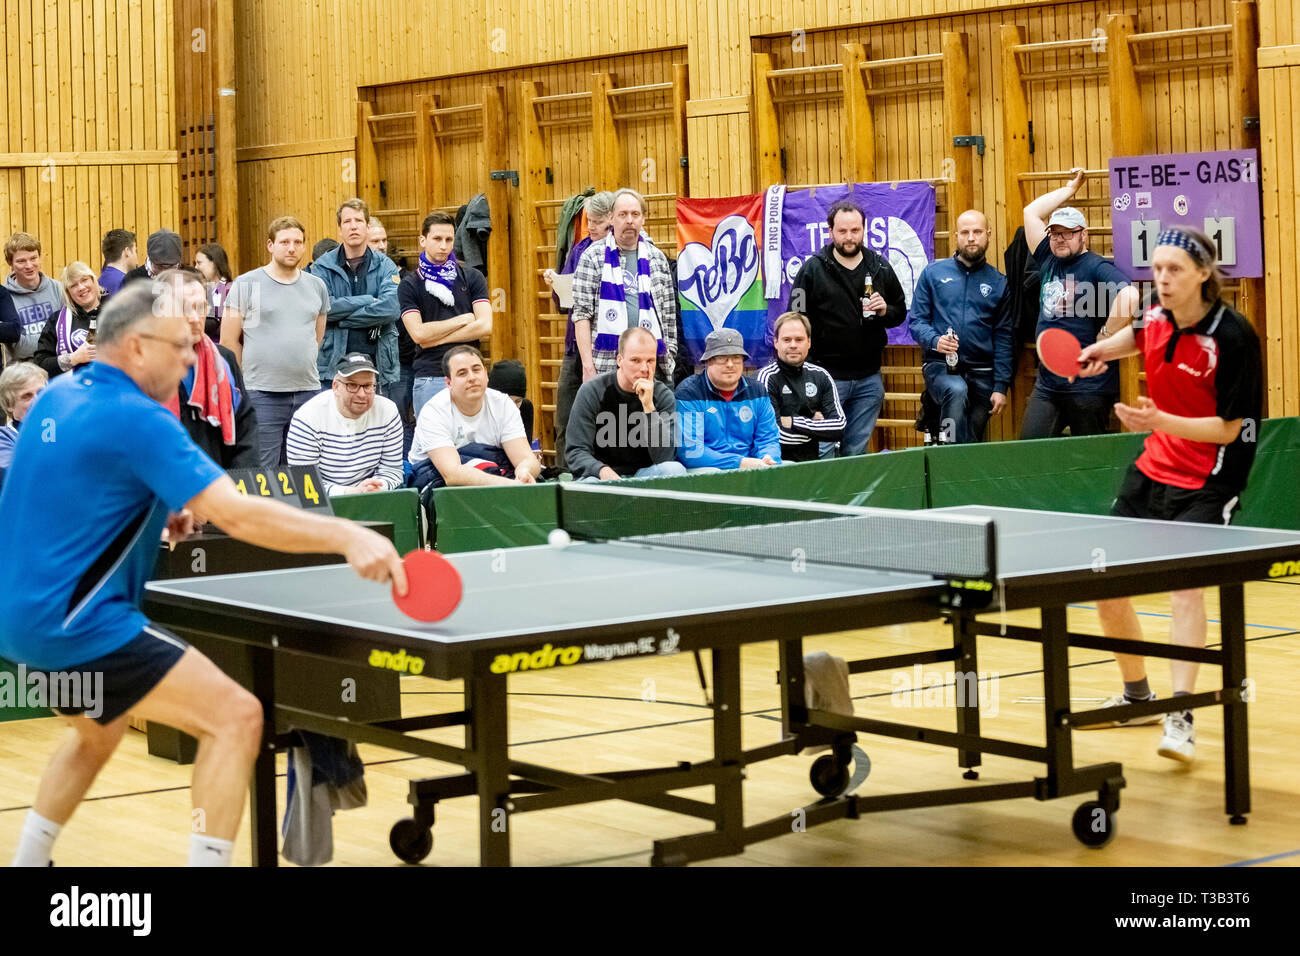 Berlin, Germany. 26th Mar, 2019. Soccer fans of Tennis Borussia Berlin (TeBe)  watch a table tennis game of the table tennis department of their club  against the Steglitzer Tischtennis Klub Berlin (STTK)